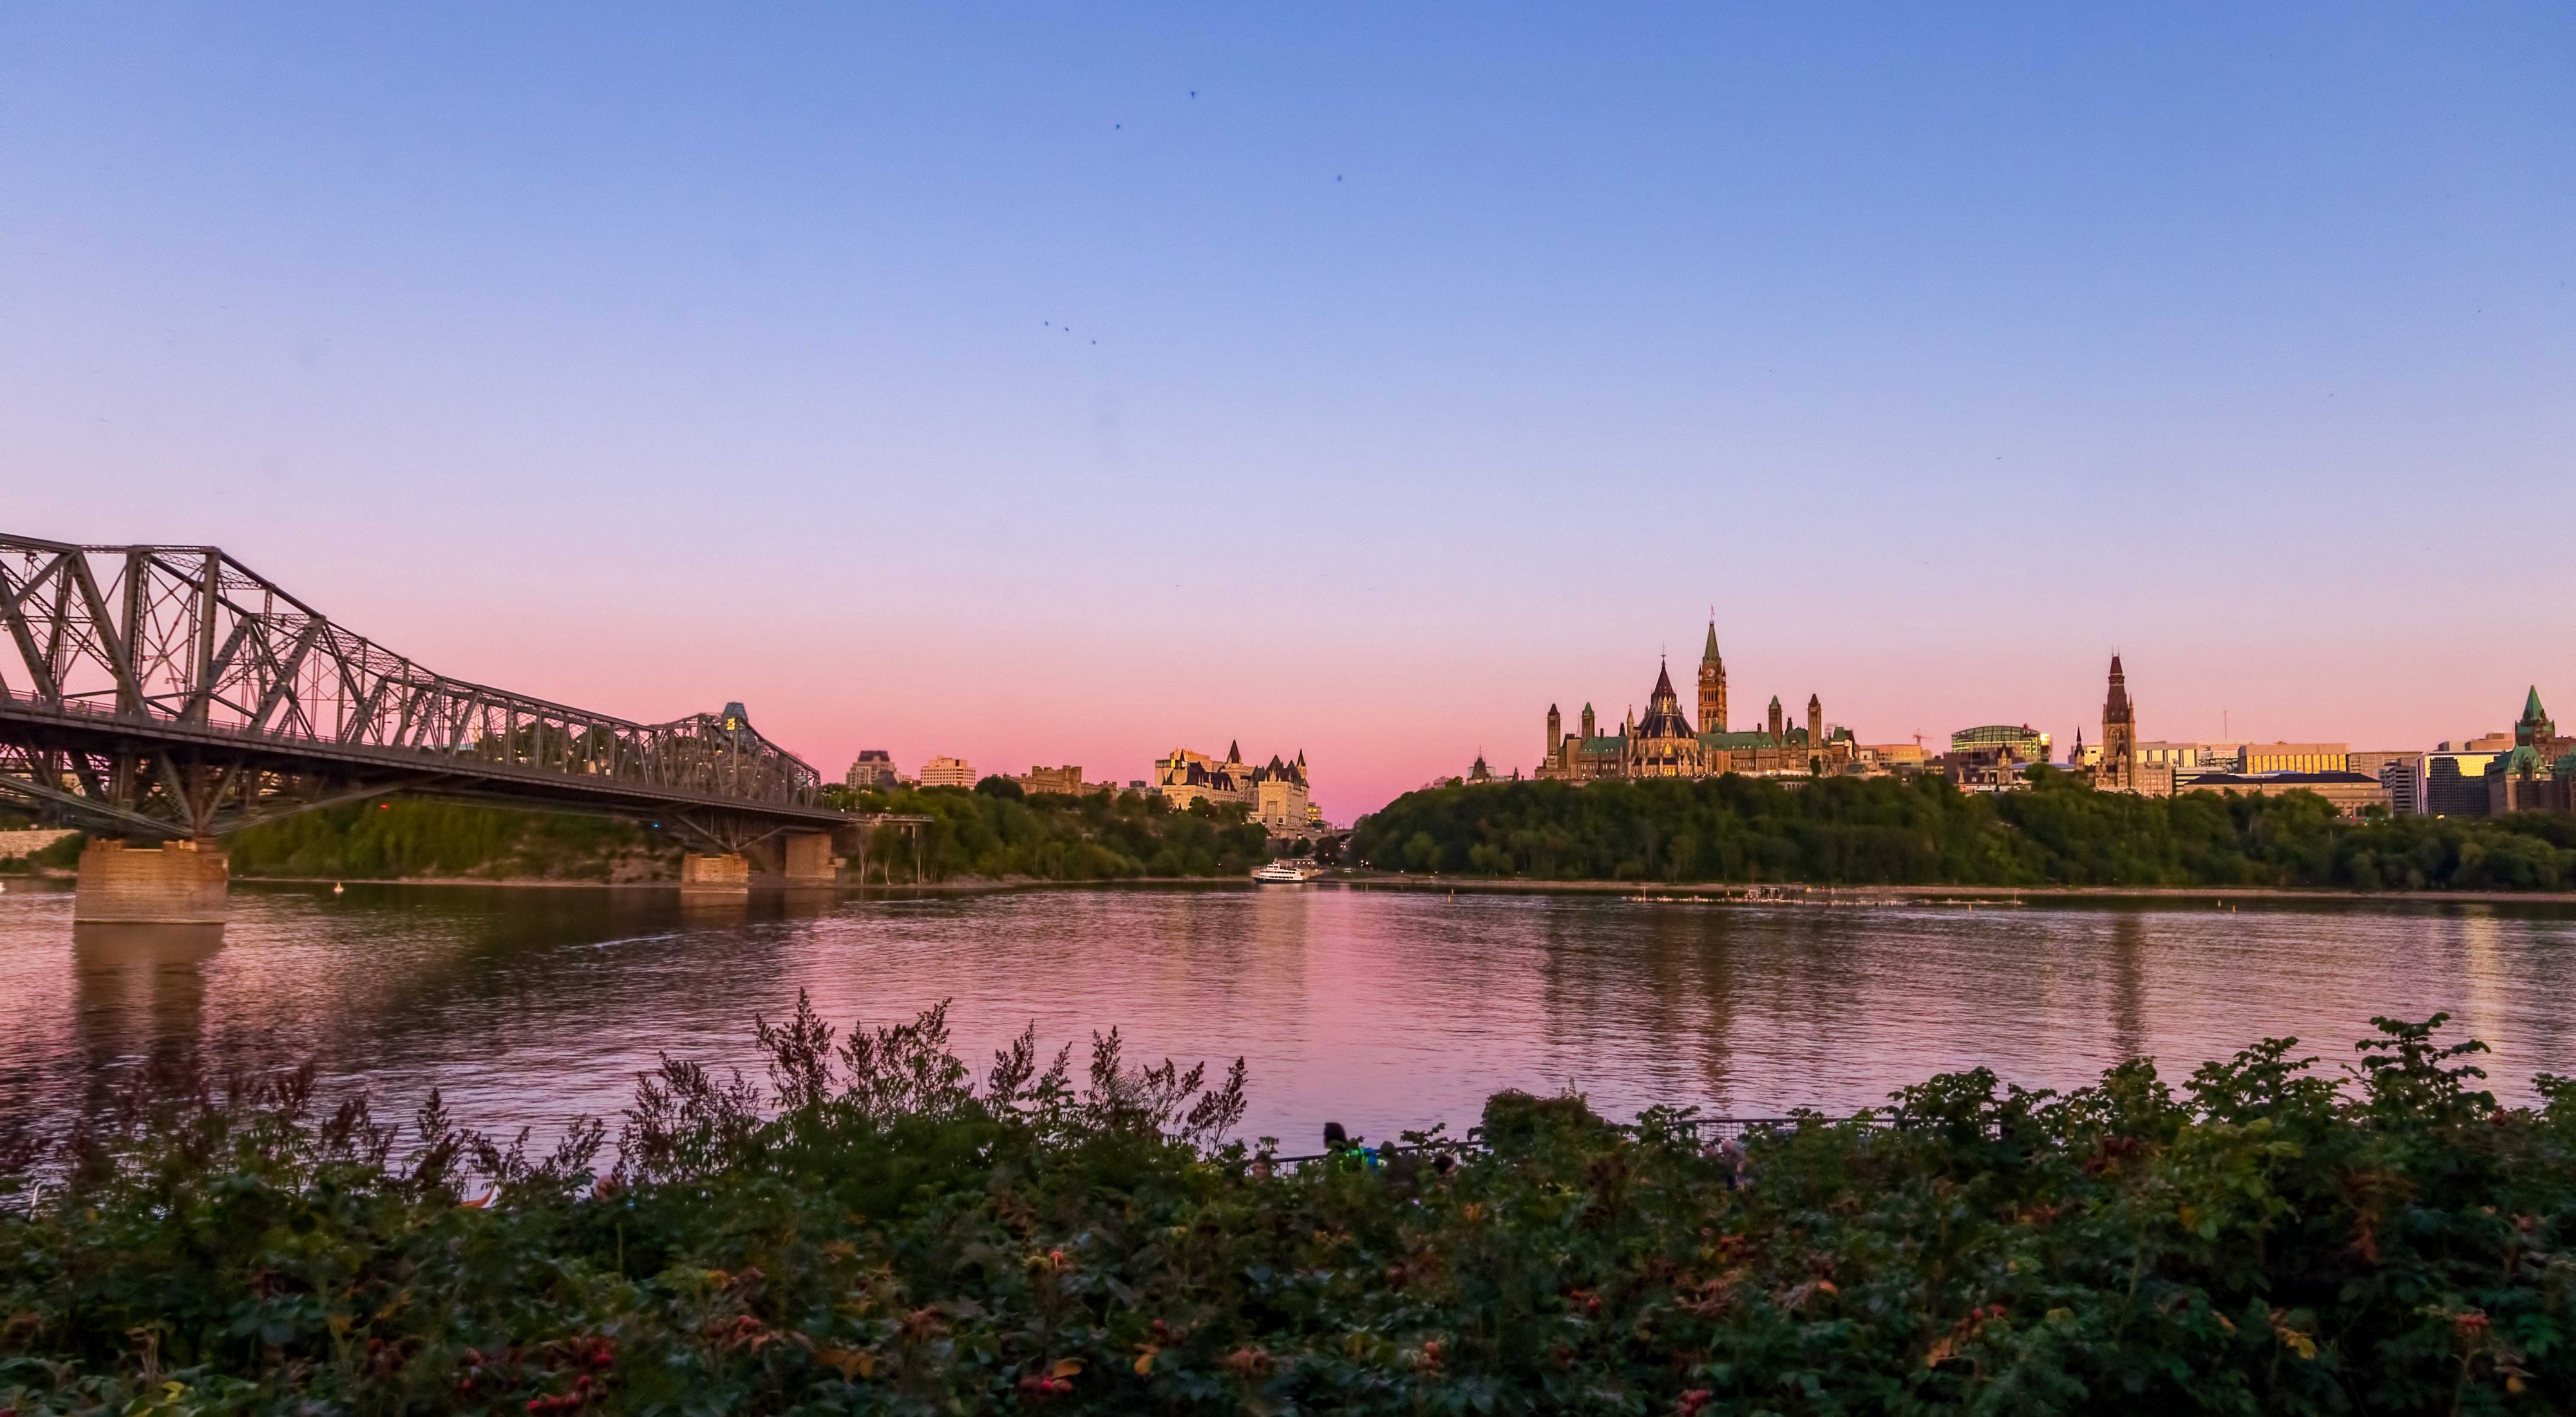 River in foreground with canadian parliament building in background.